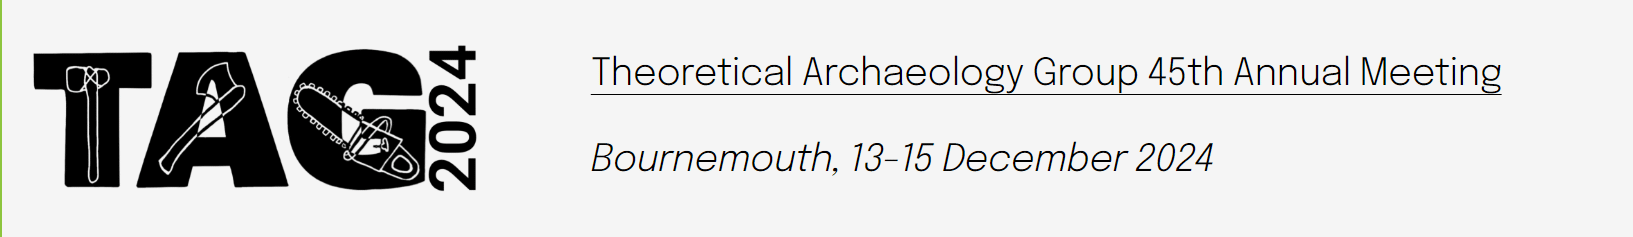 Theoretical Archaeology Group 45th Annual Meeting